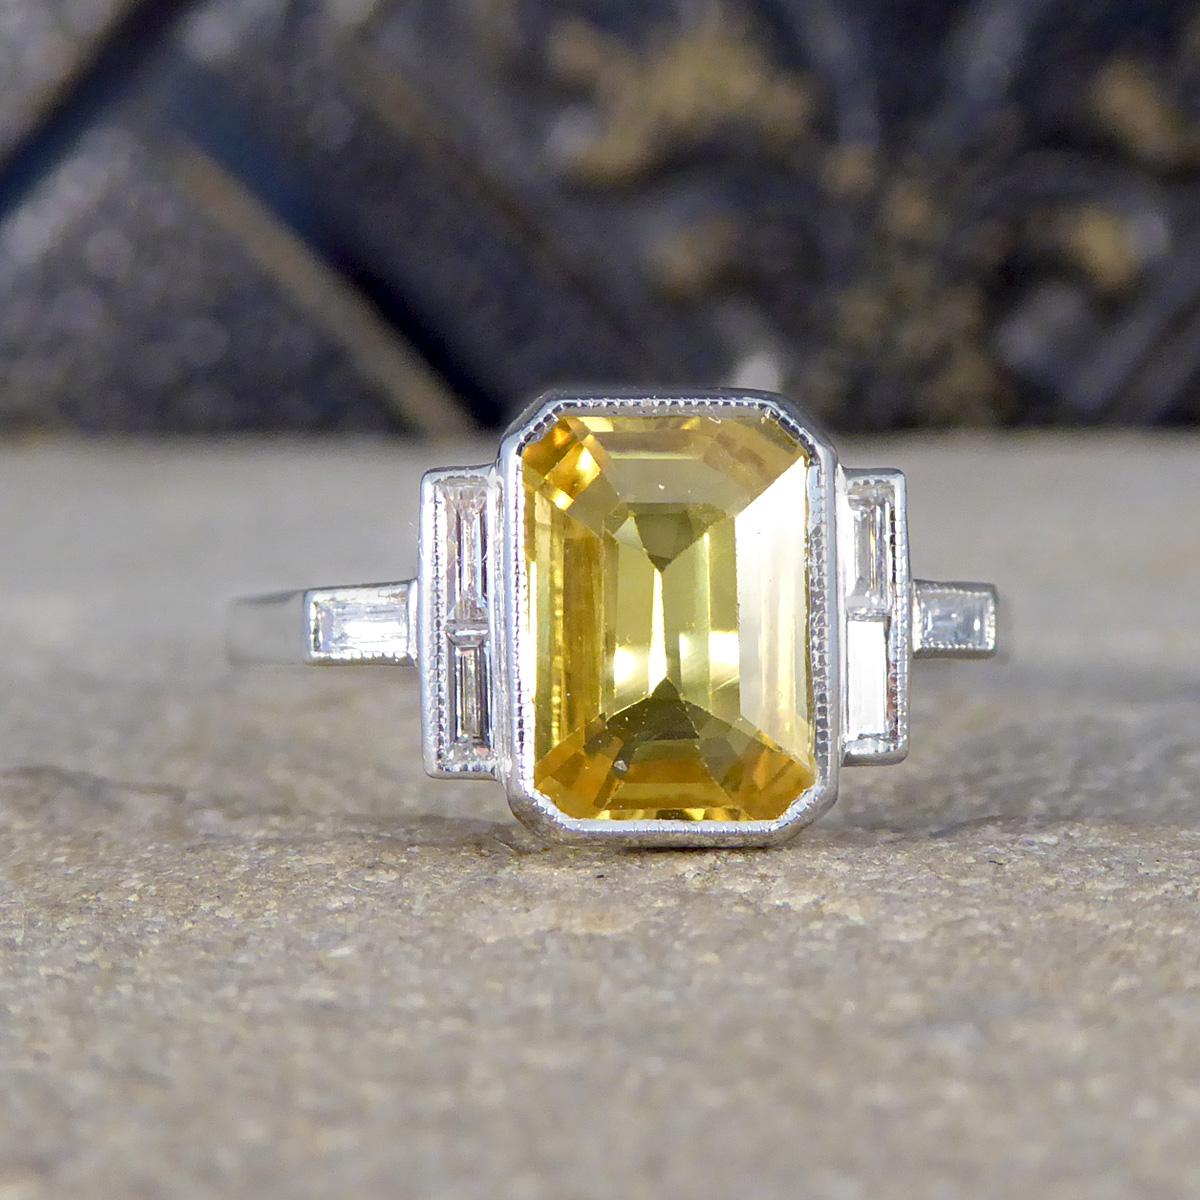 Embrace the allure of a bygone era with this exquisite Art Deco-inspired ring, a masterpiece of design and craftsmanship. This captivating piece features a striking yellow sapphire, complemented by baguette-cut diamonds accenting each shoulder, all